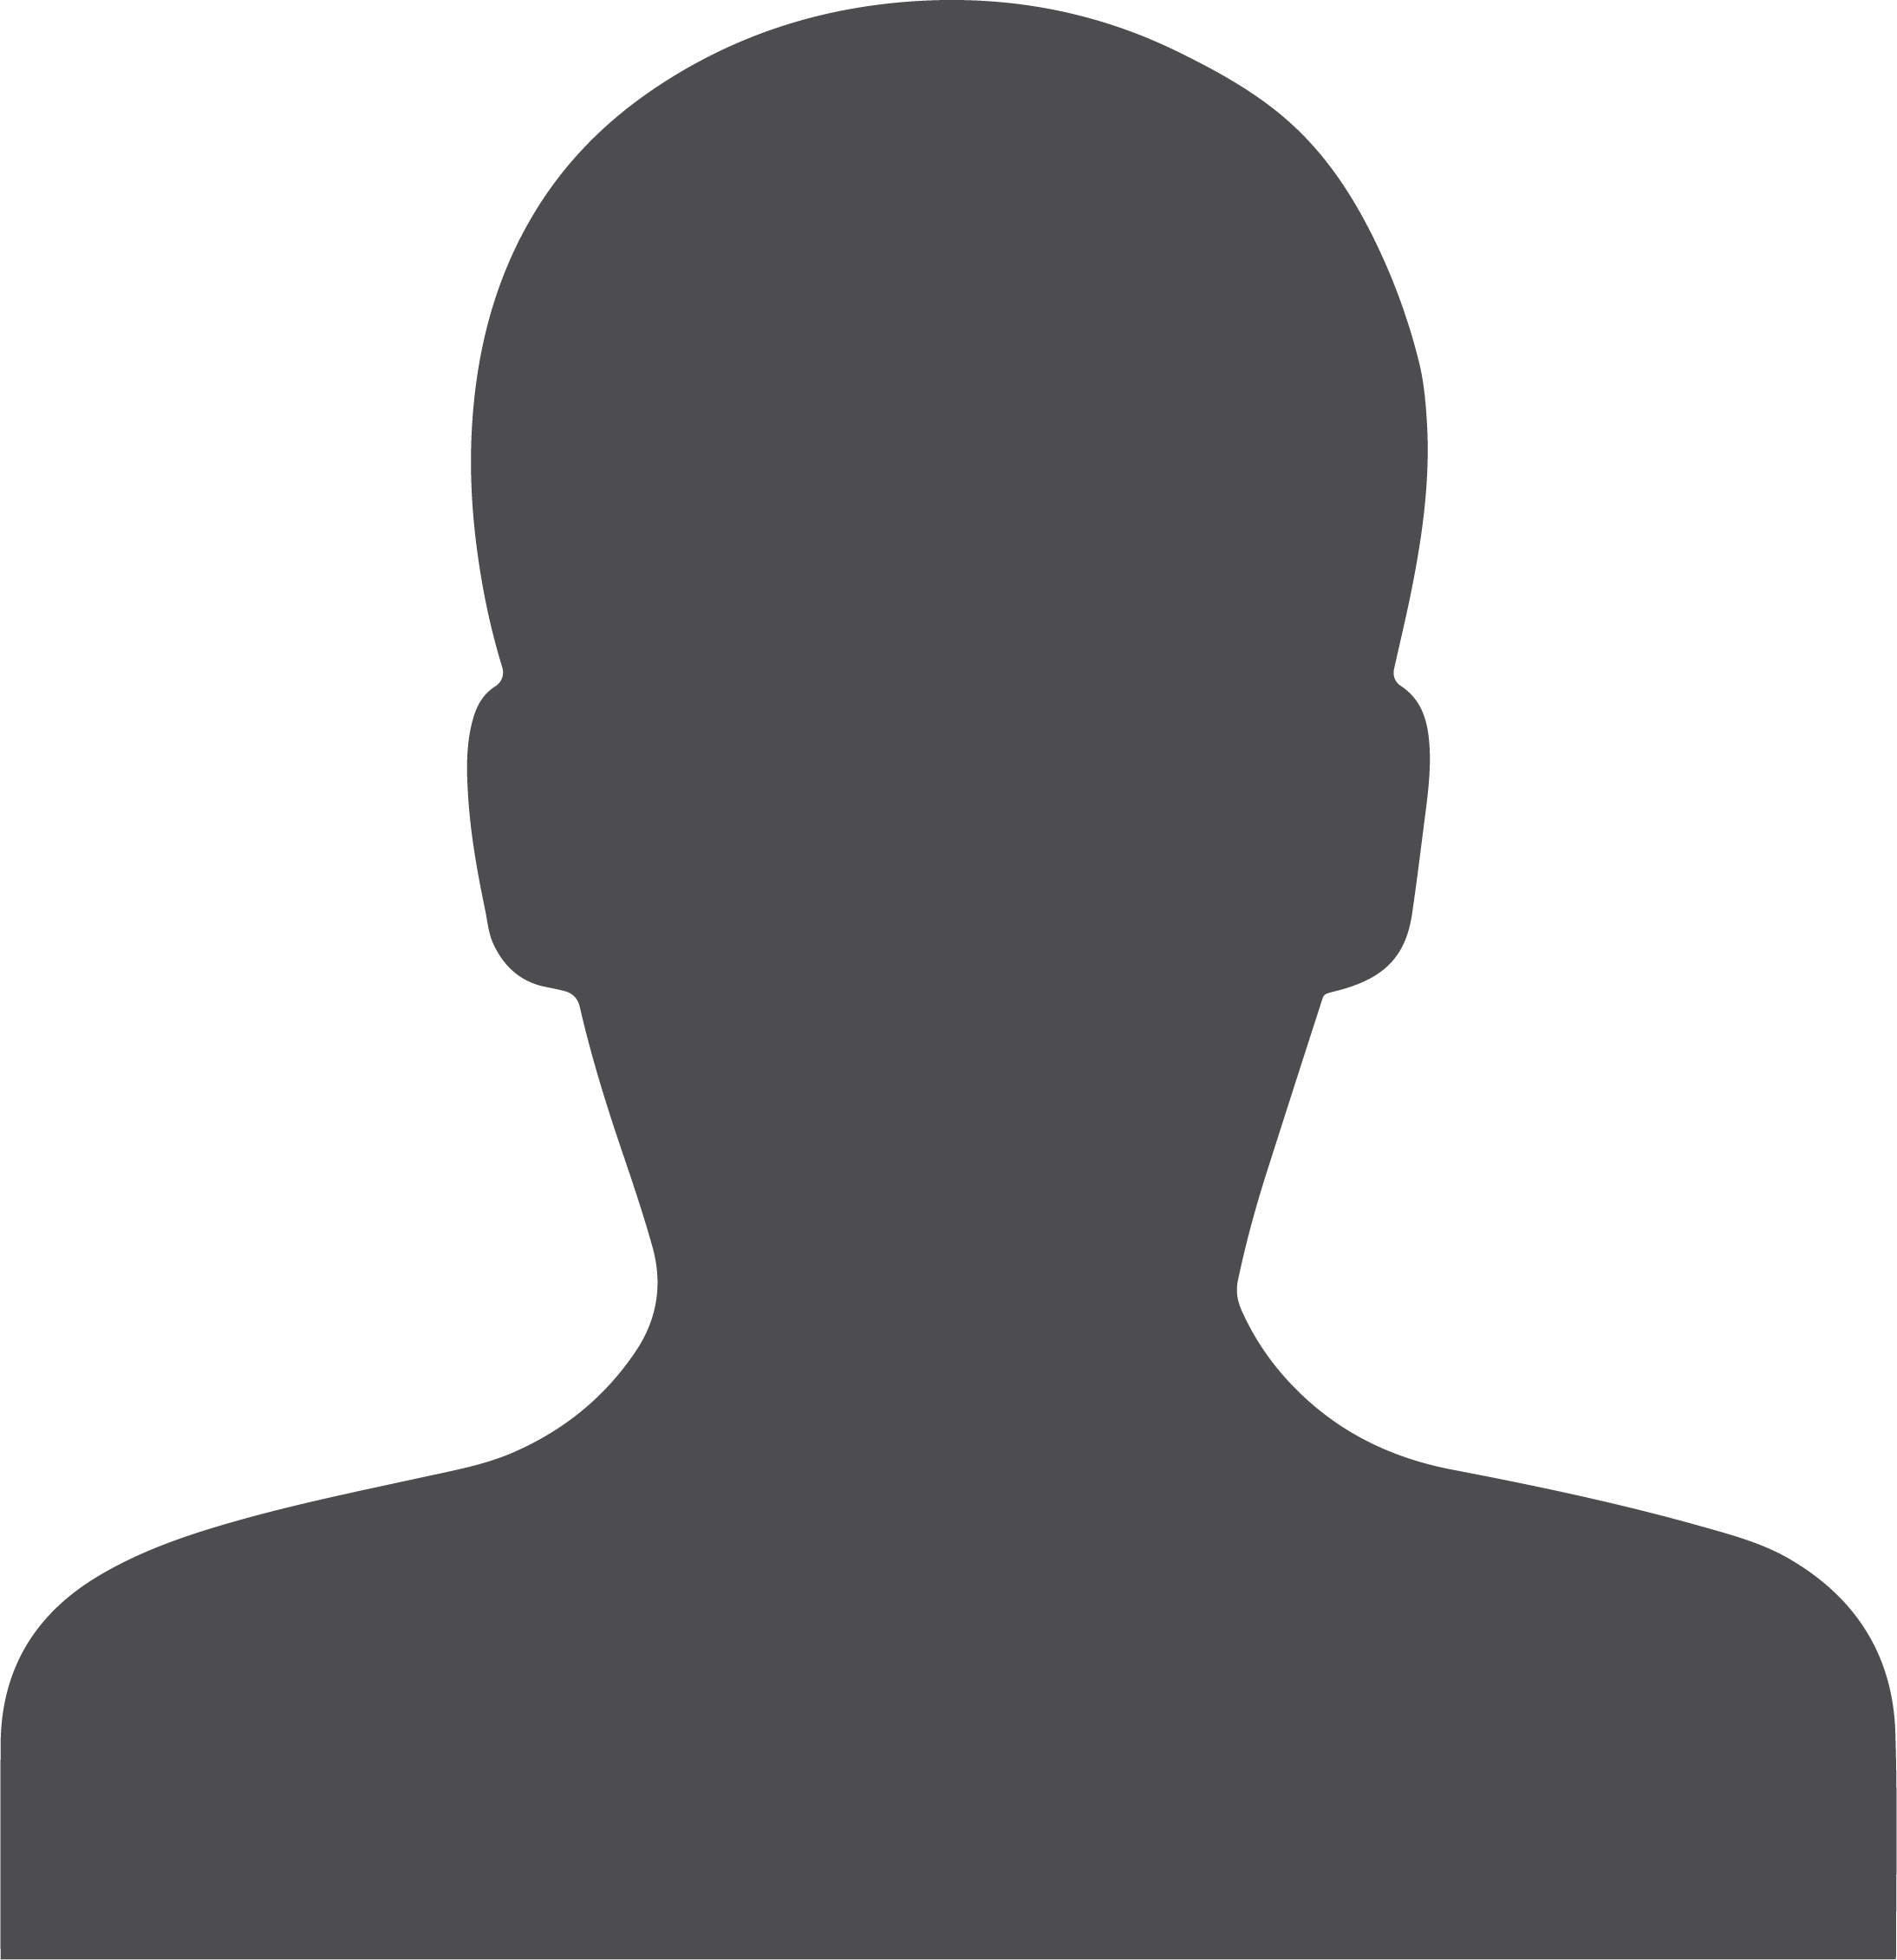 Uploaded Image: /vs-uploads/images/avatar-man-face-silhouette-user-sign-person-profile-picture-male-icon-black-color-illustration-flat-style-image-vector.png